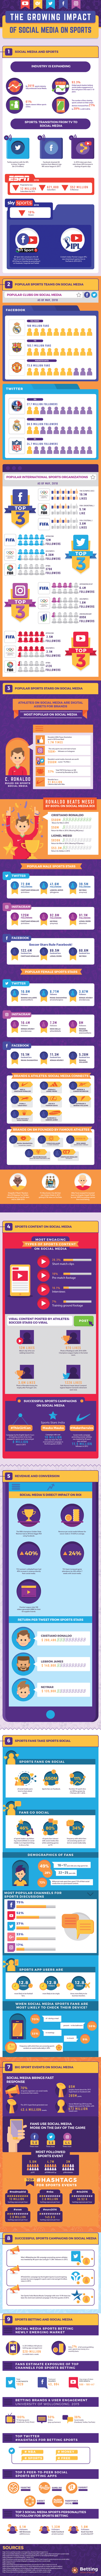 Social Media Impact on Sports Infographic